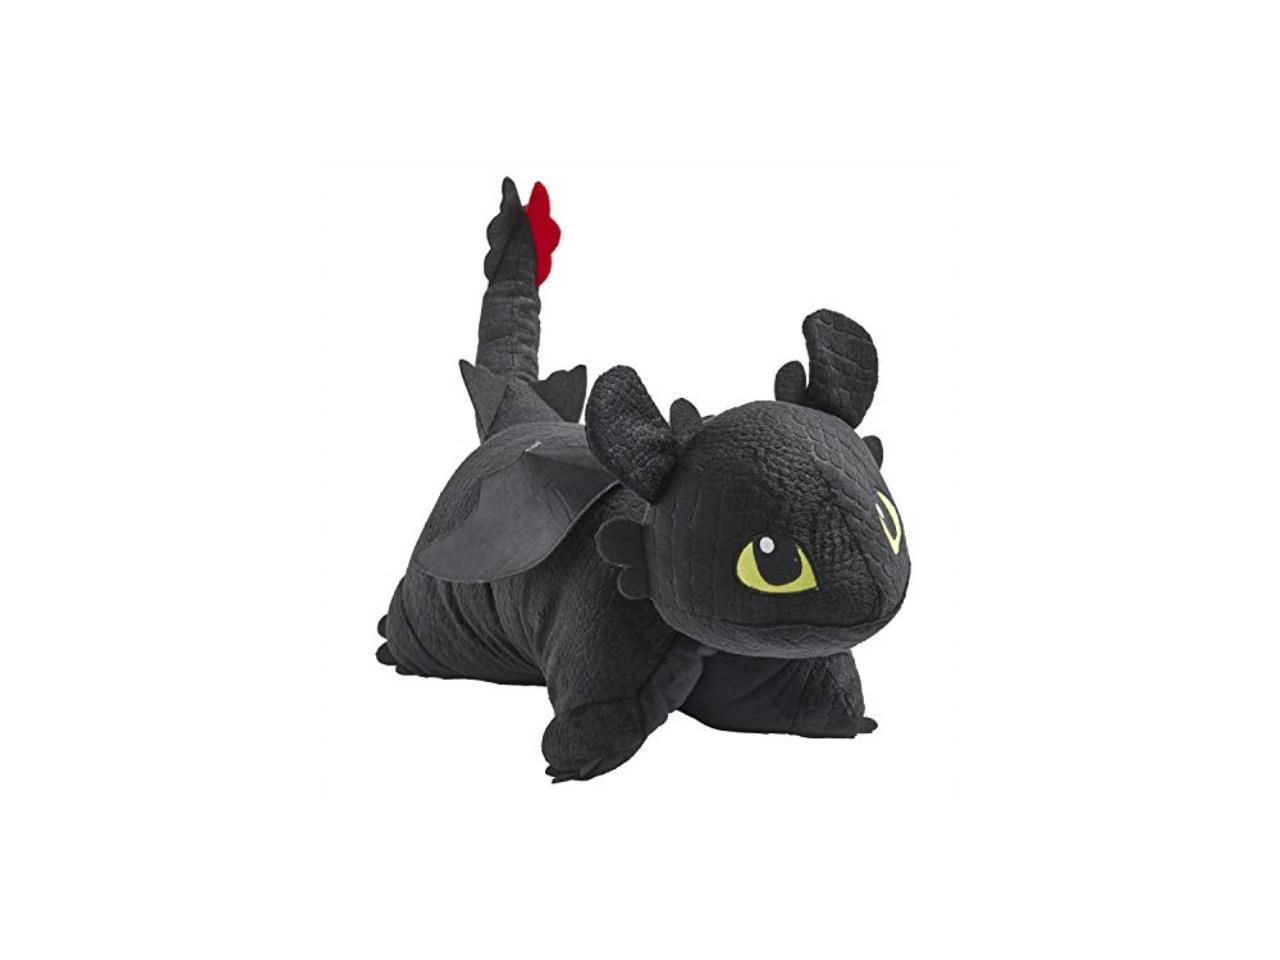 Toothless Dragon Animation 'How to Train your Dragon' Plush Doll Stuffed UK !!! 